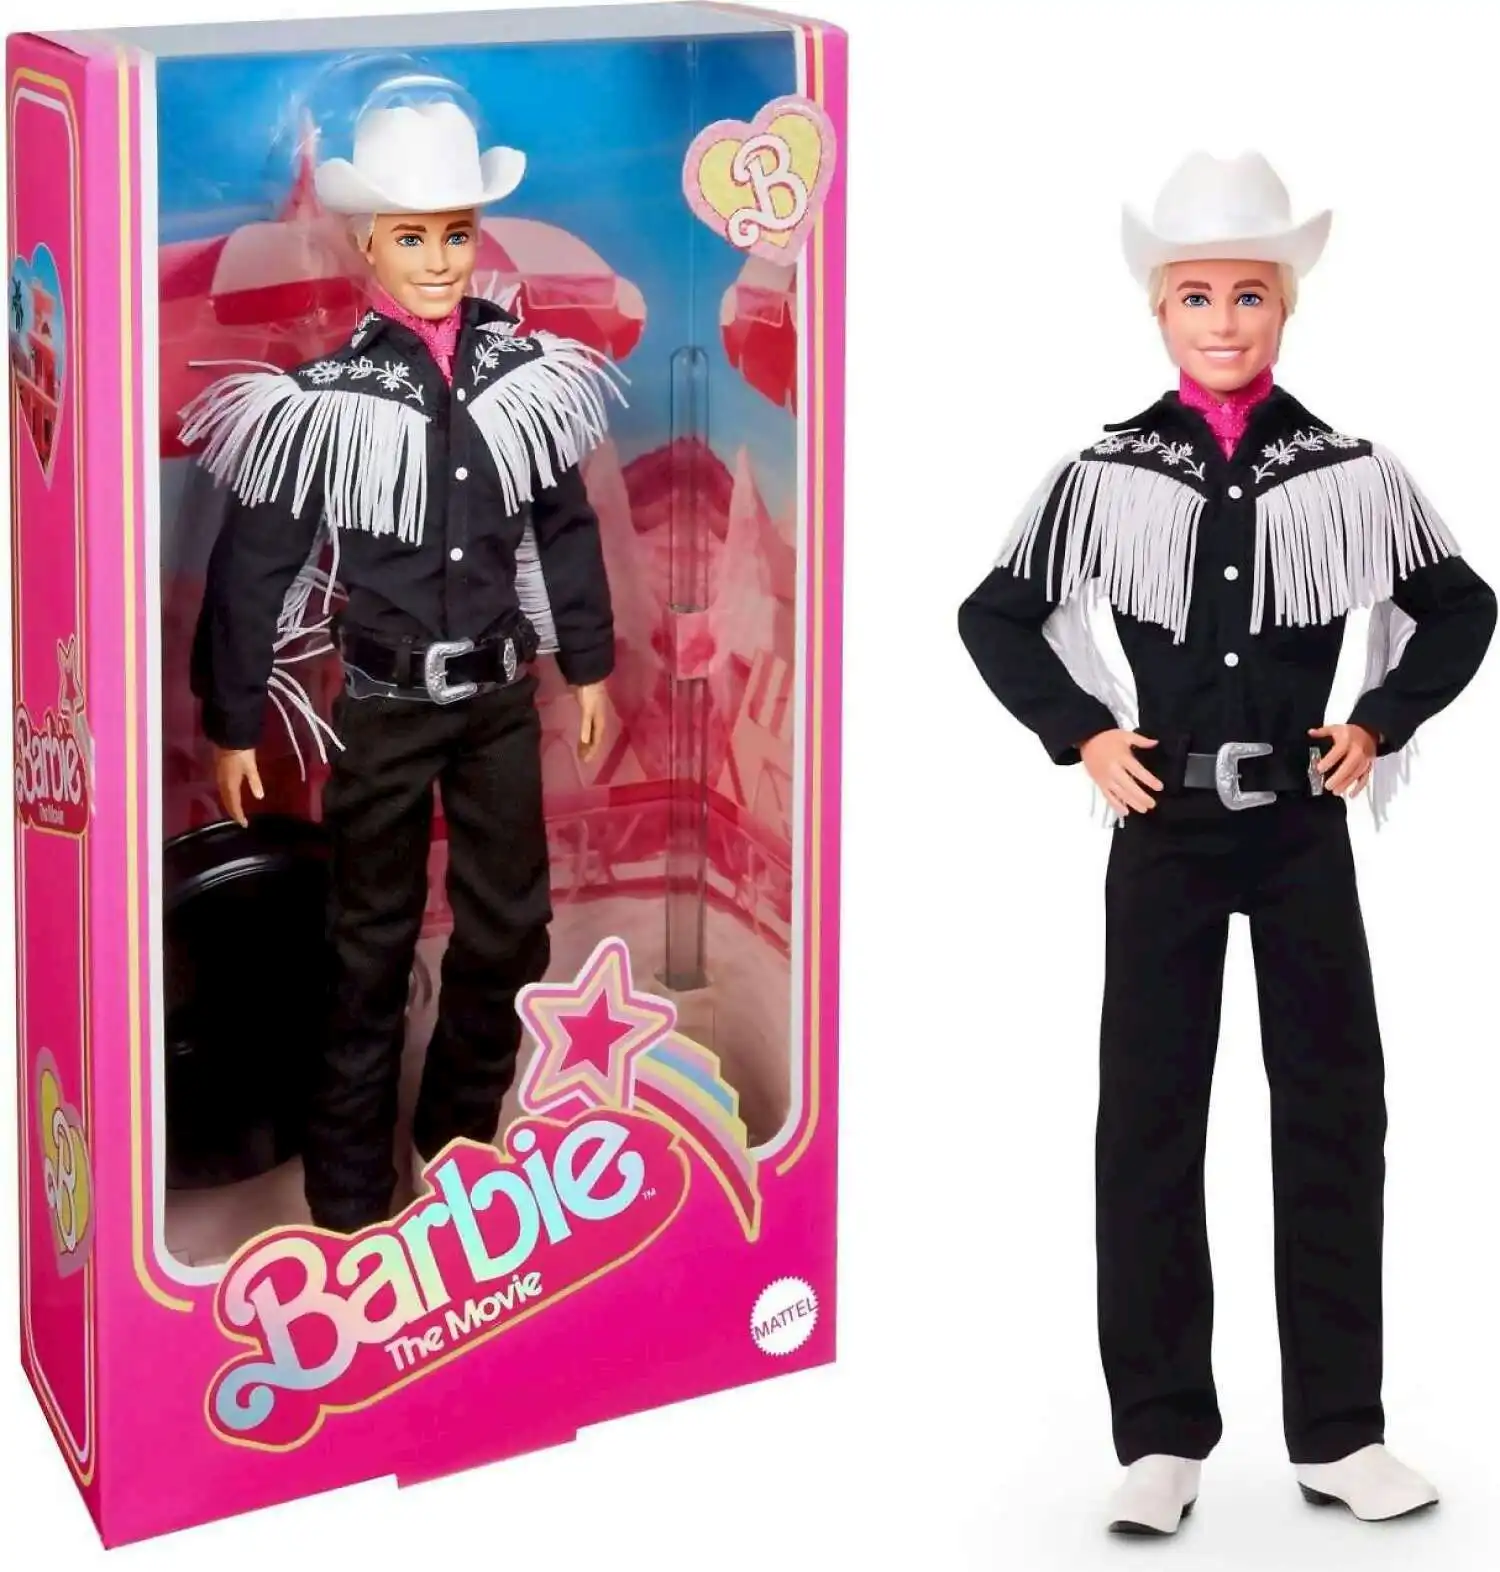 Barbie - The Movie Collectible Ken Doll Wearing Black And White Western Outfit - Mattel